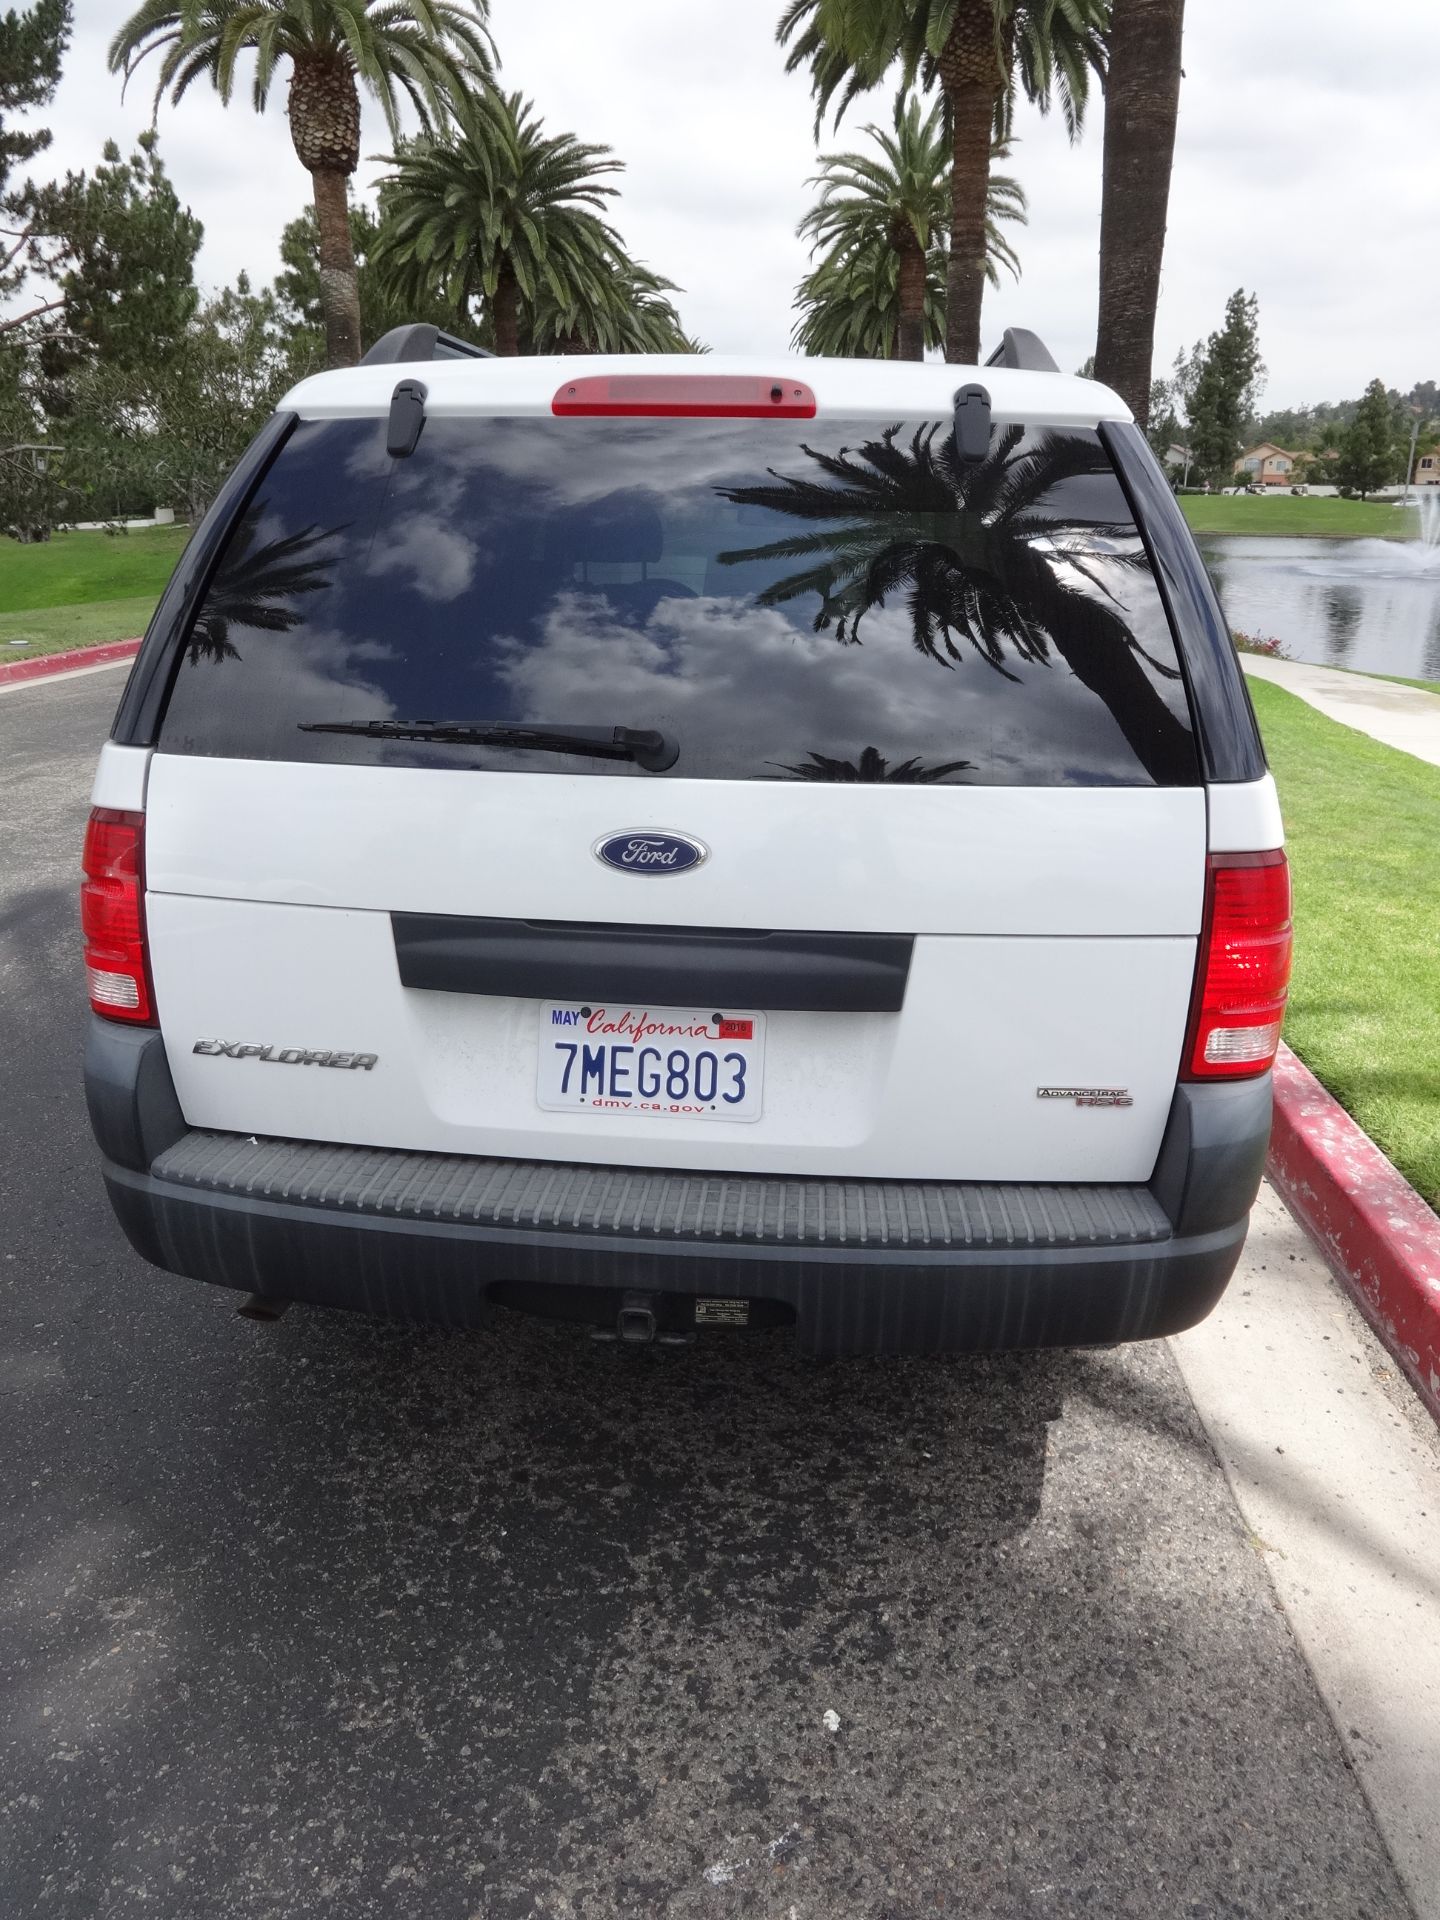 2005 Ford Explorer Advance Trac RSC, VERY GOOD CONDITION (One of Our Best) Equiped with Light Bar - Image 8 of 12